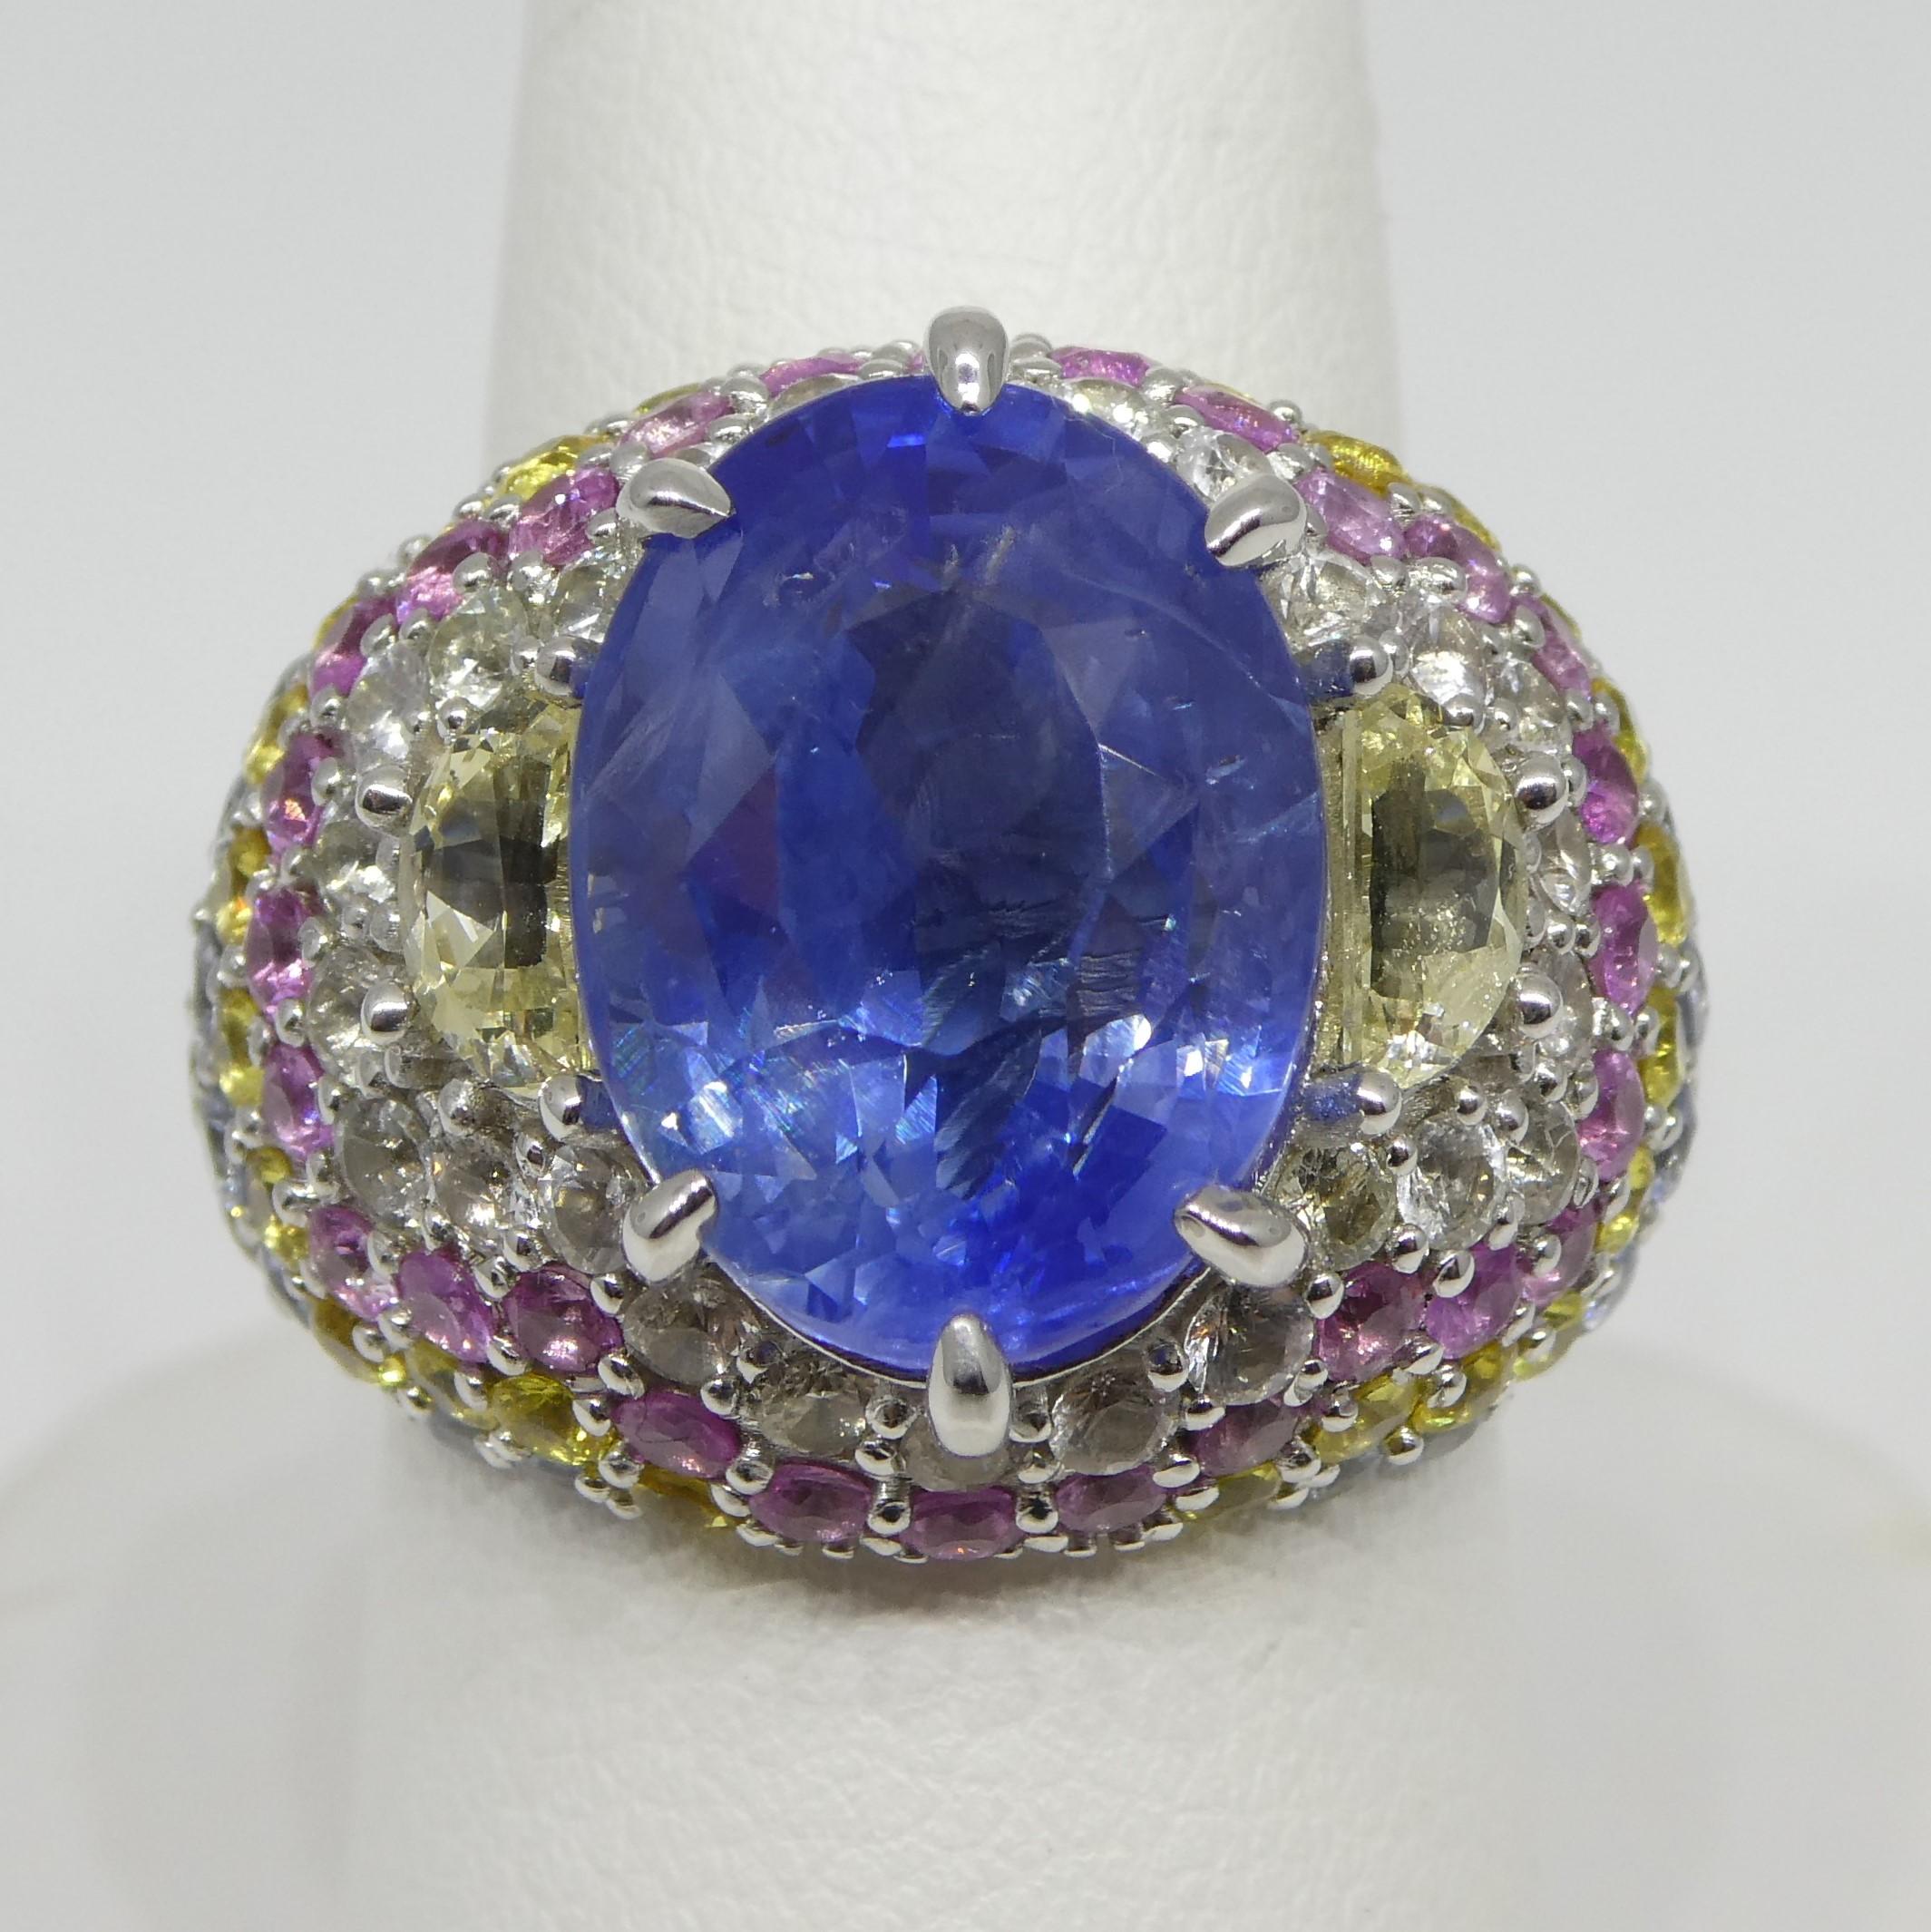 10.03ct Unheated Blue Sapphire Cluster Ring in 18k White Gold 12